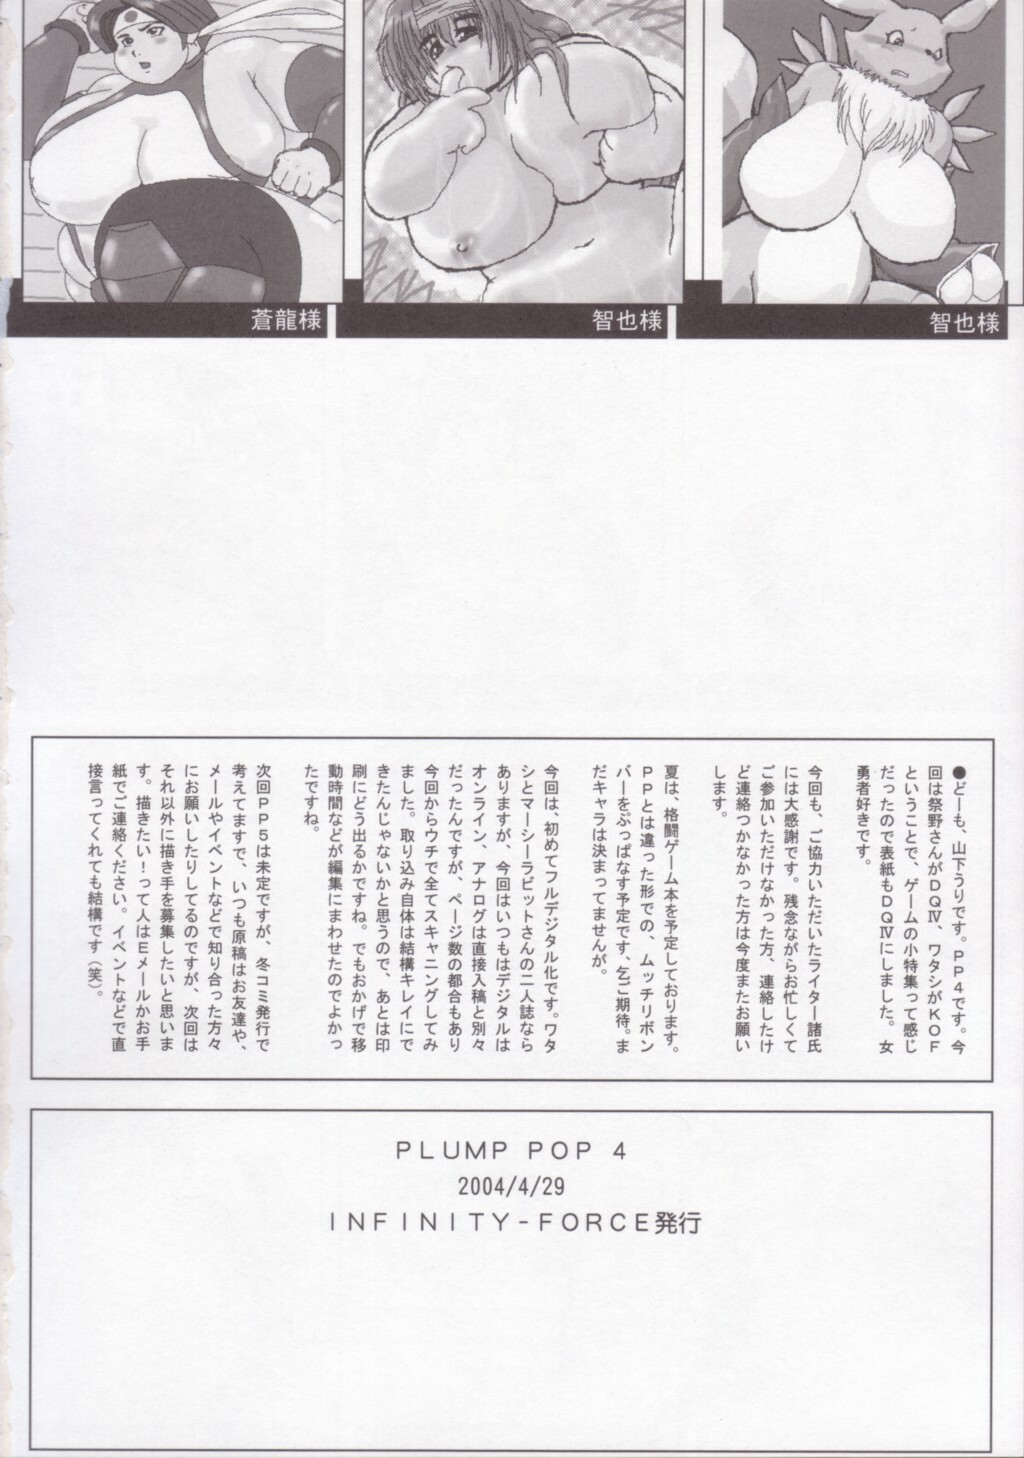 (CR35) [Infinity-Force (Various)] Plump Pop 4 (Various) page 48 full